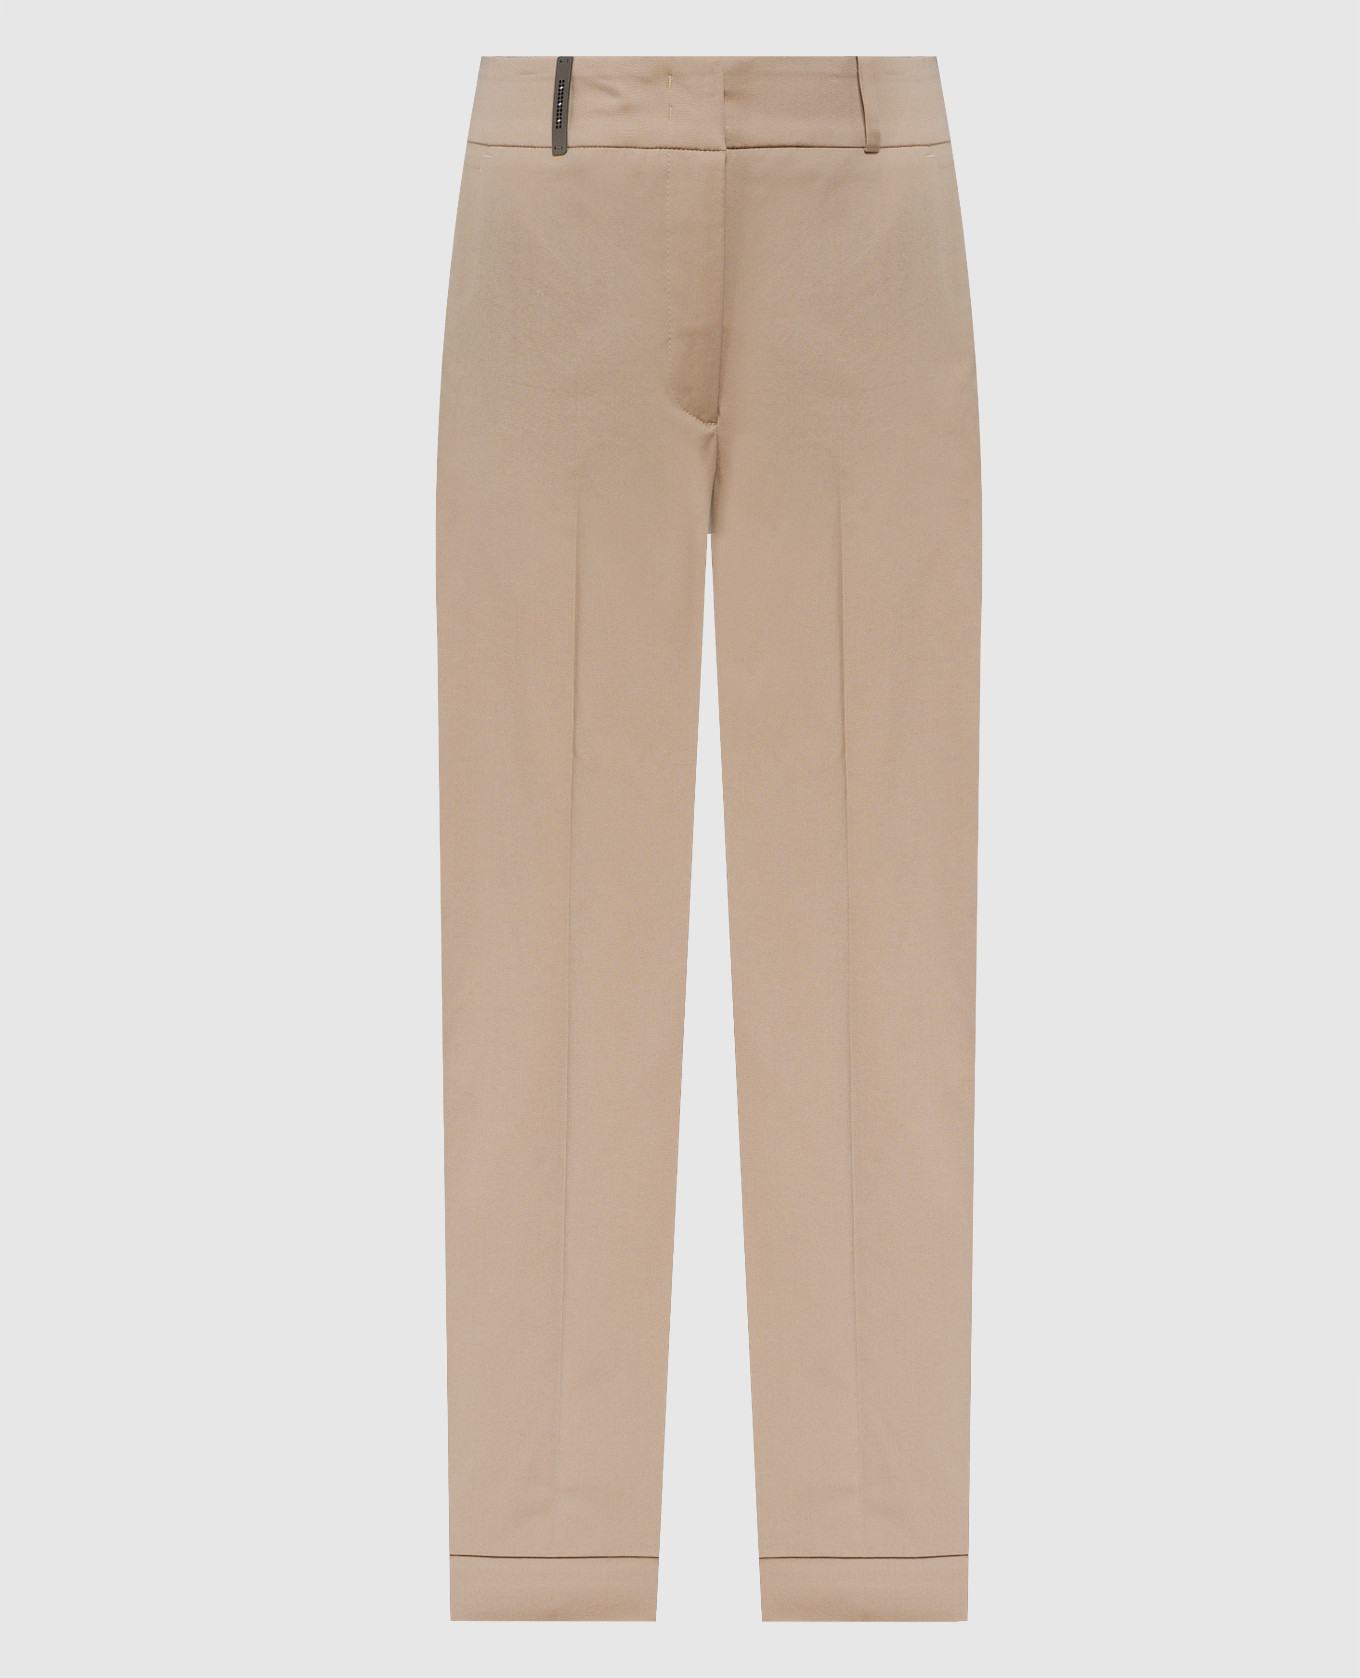 Brown pants with lapels